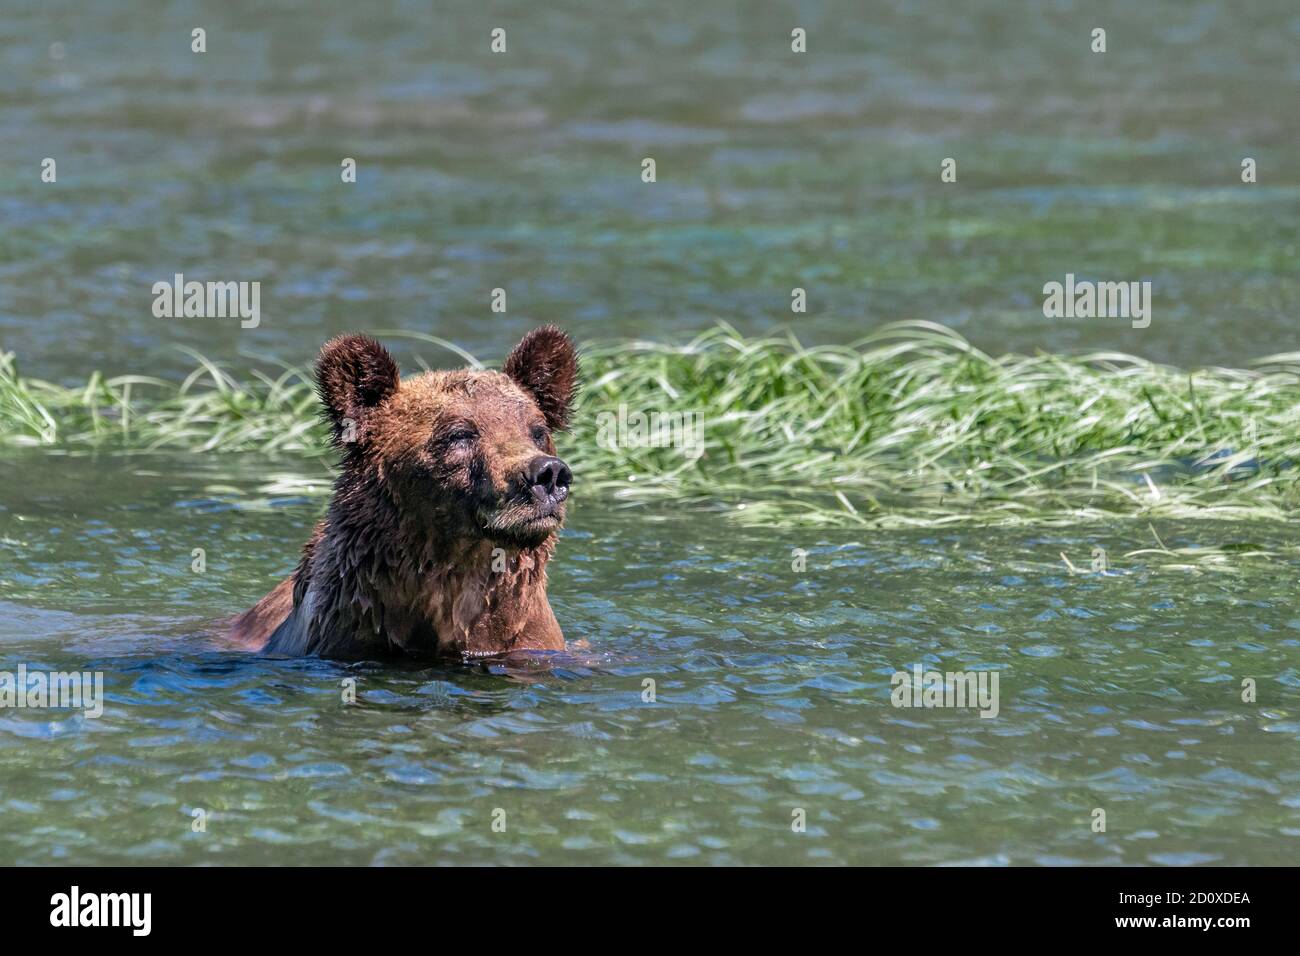 Grizzly bear in the water at high tide near some sedge grass, Khutzeymateen, BC Stock Photo